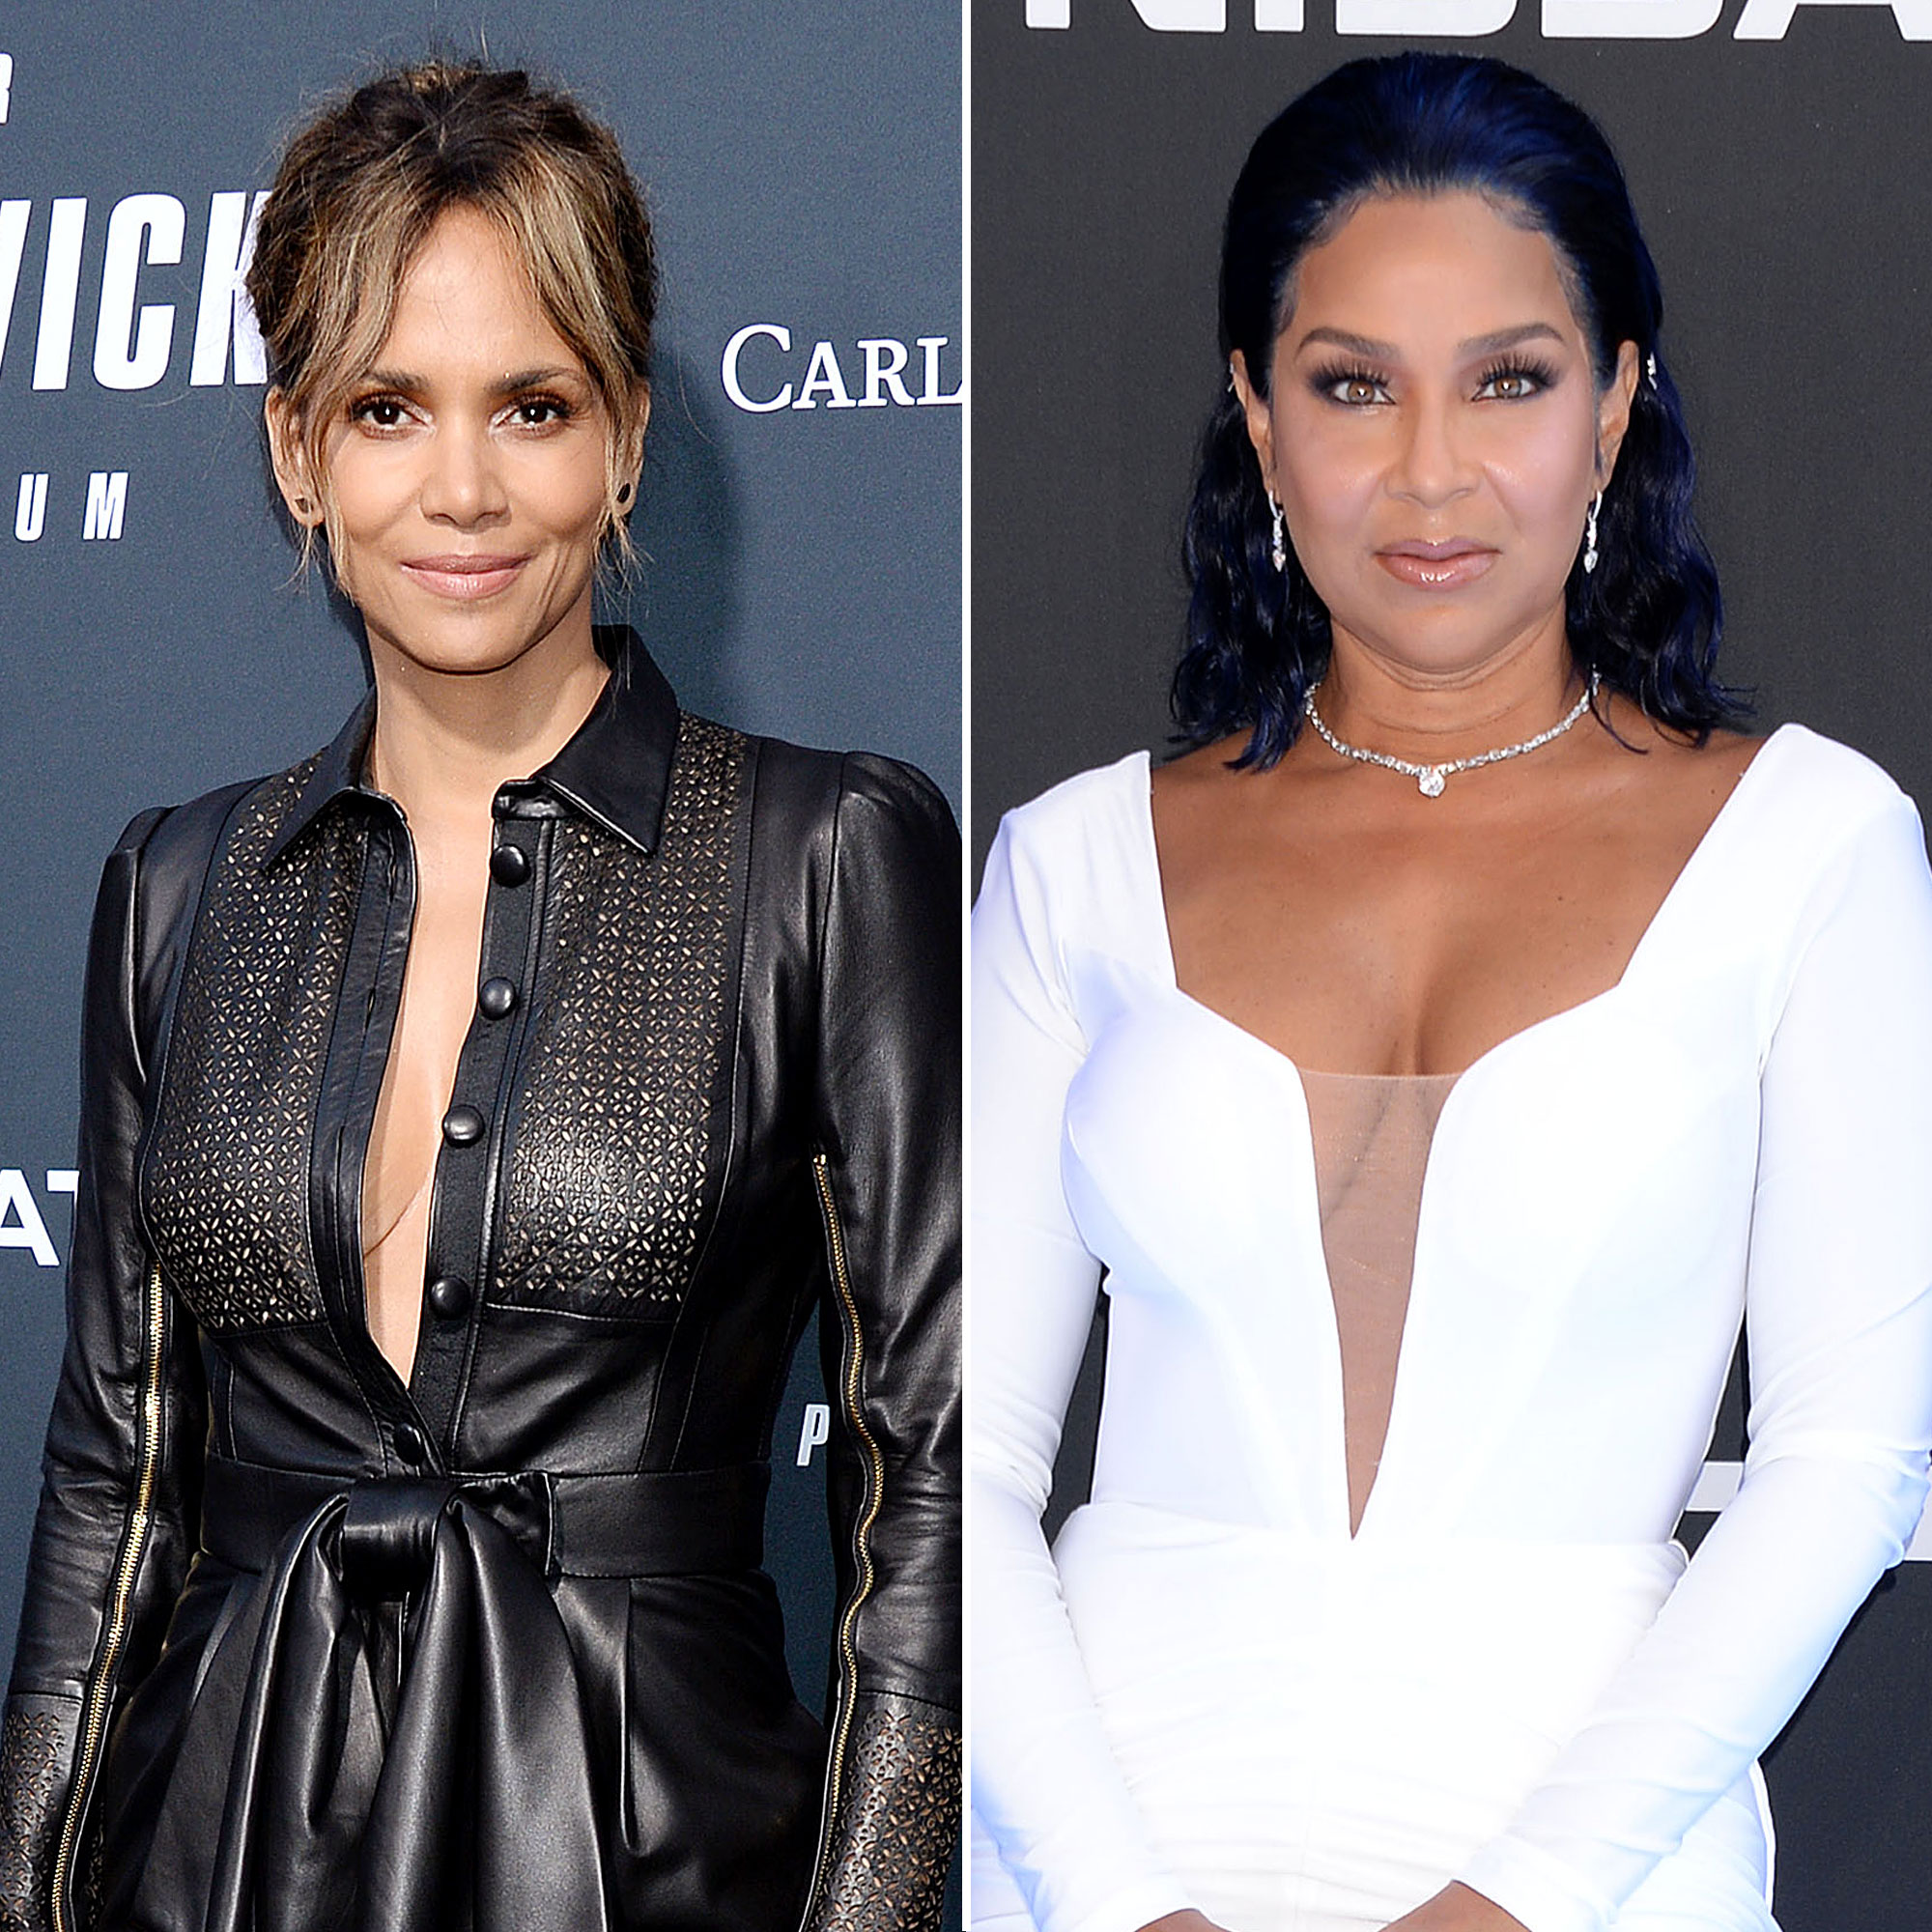 Halle Berry Is Fine With Aging, but She's Going Down Fighting